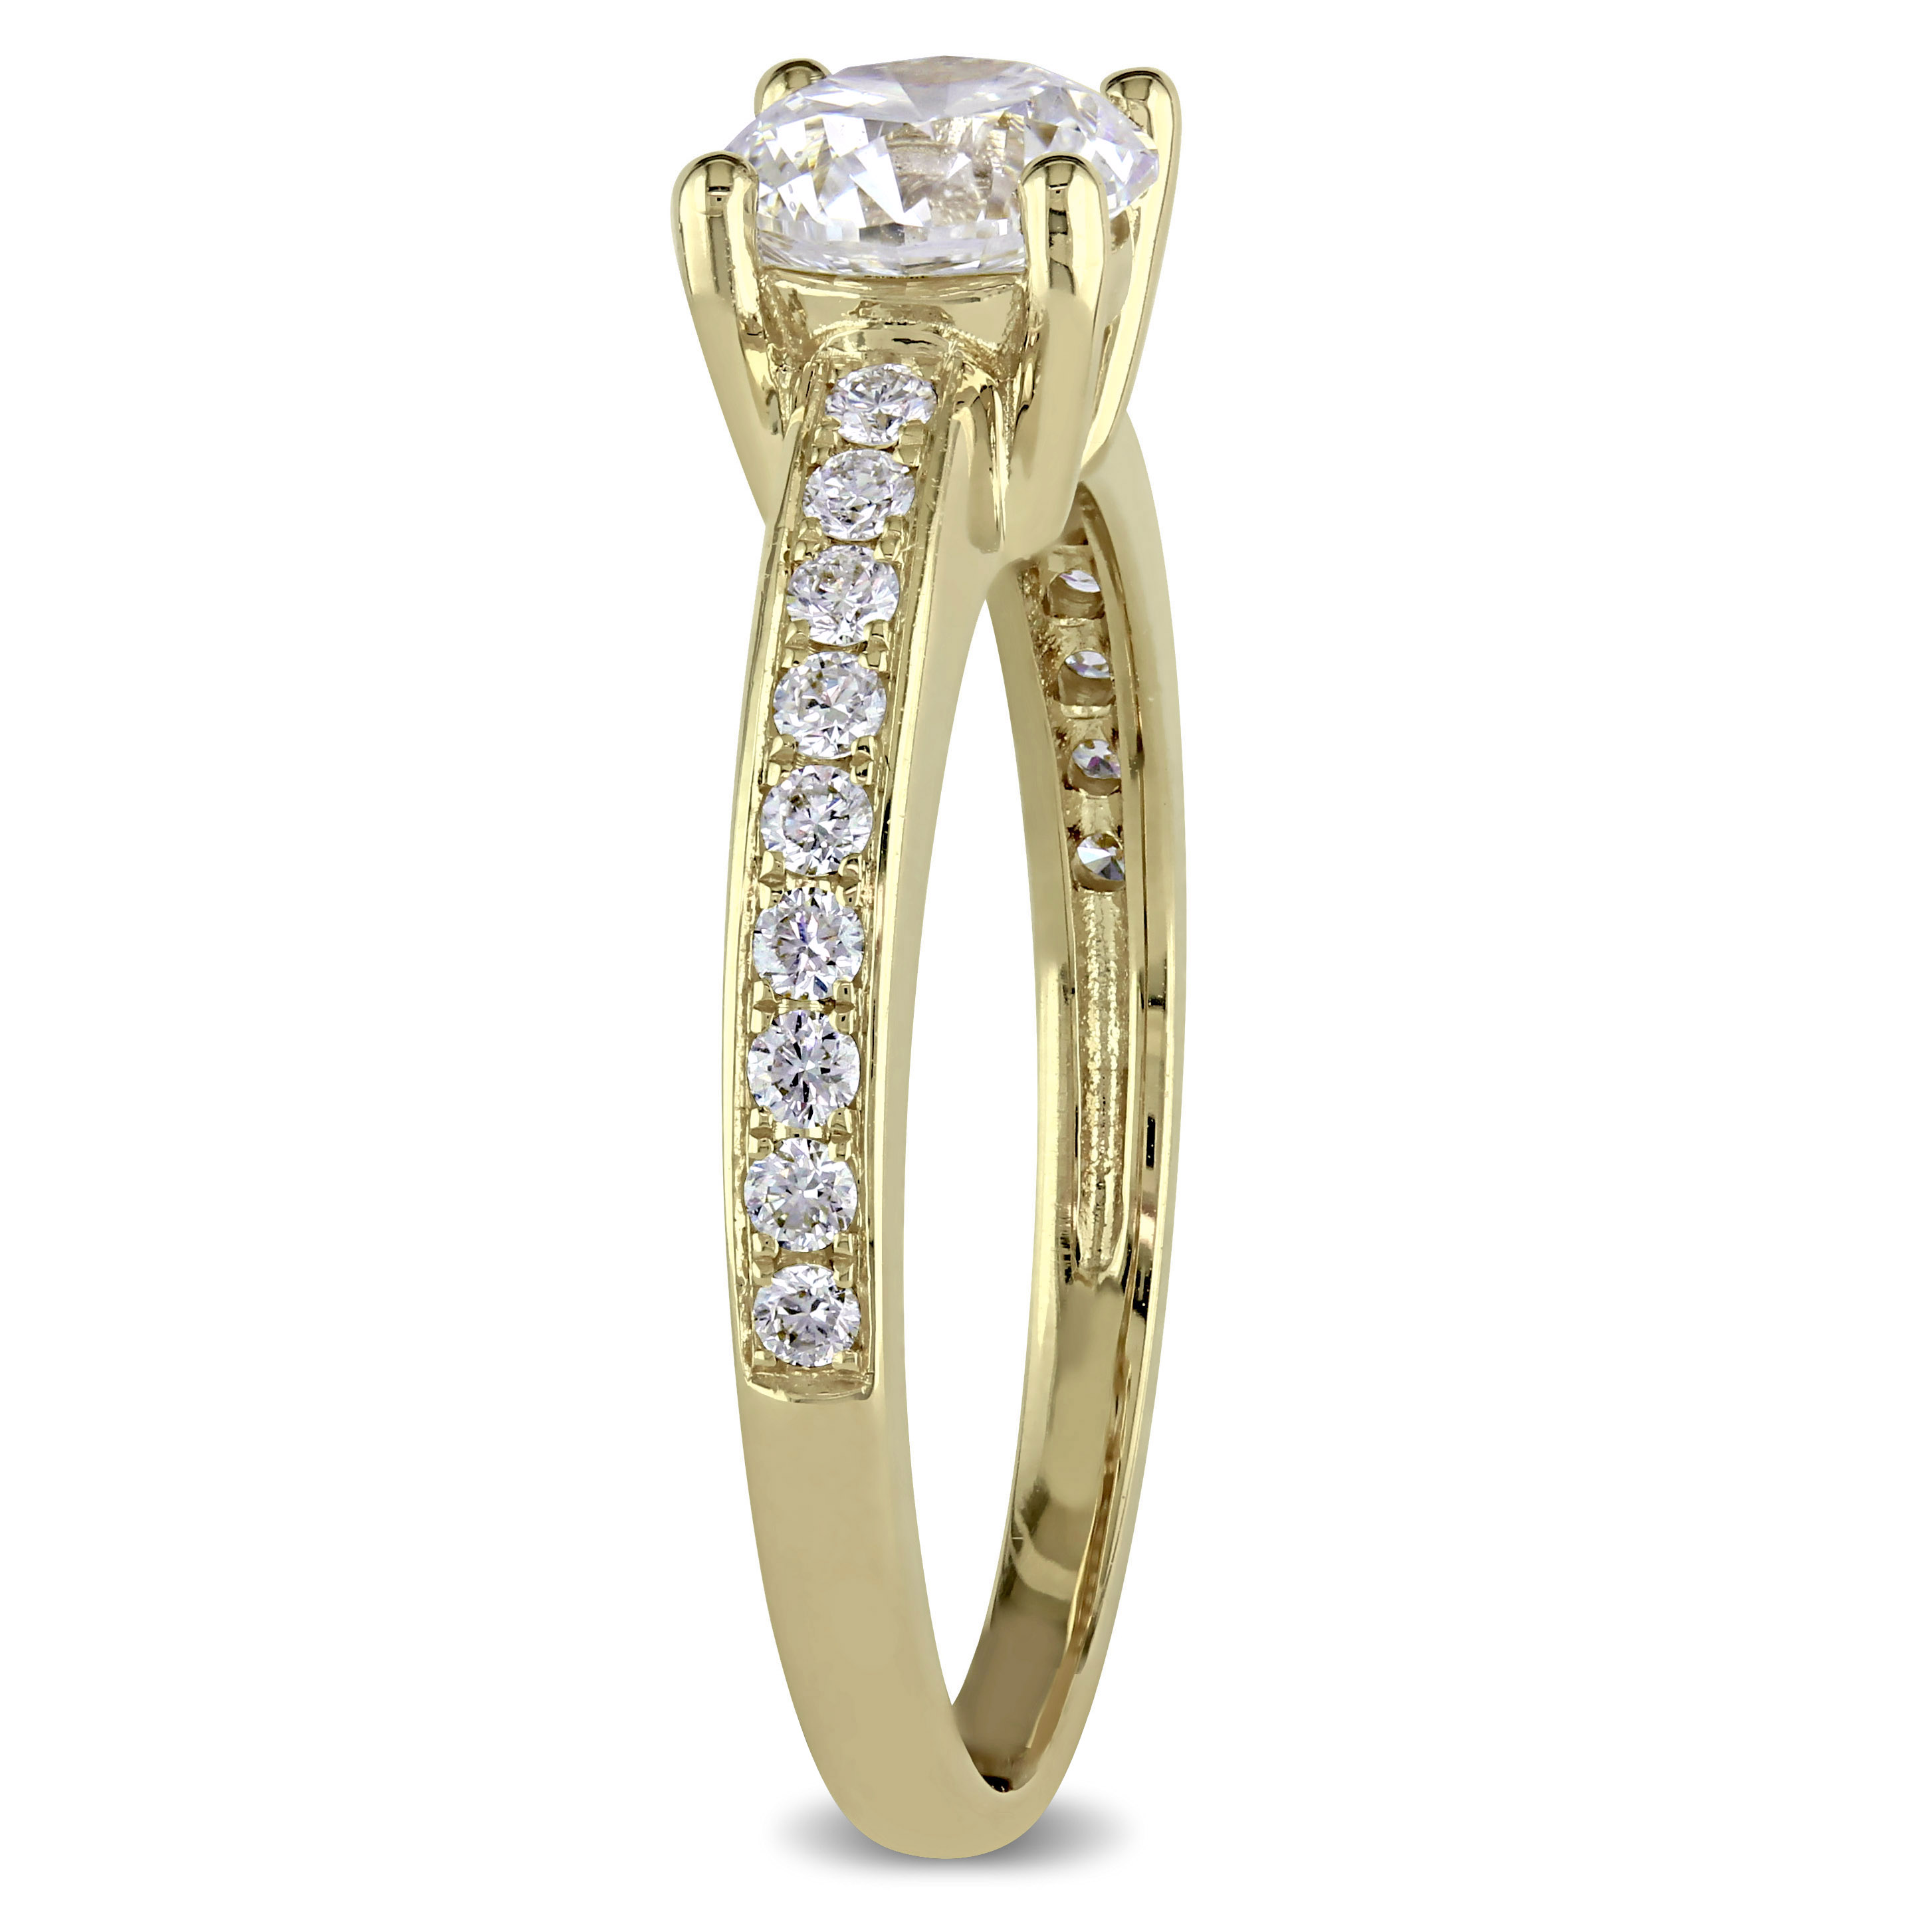 1 1/6 CT TW Diamond Engagement Ring in 14k Yellow Gold